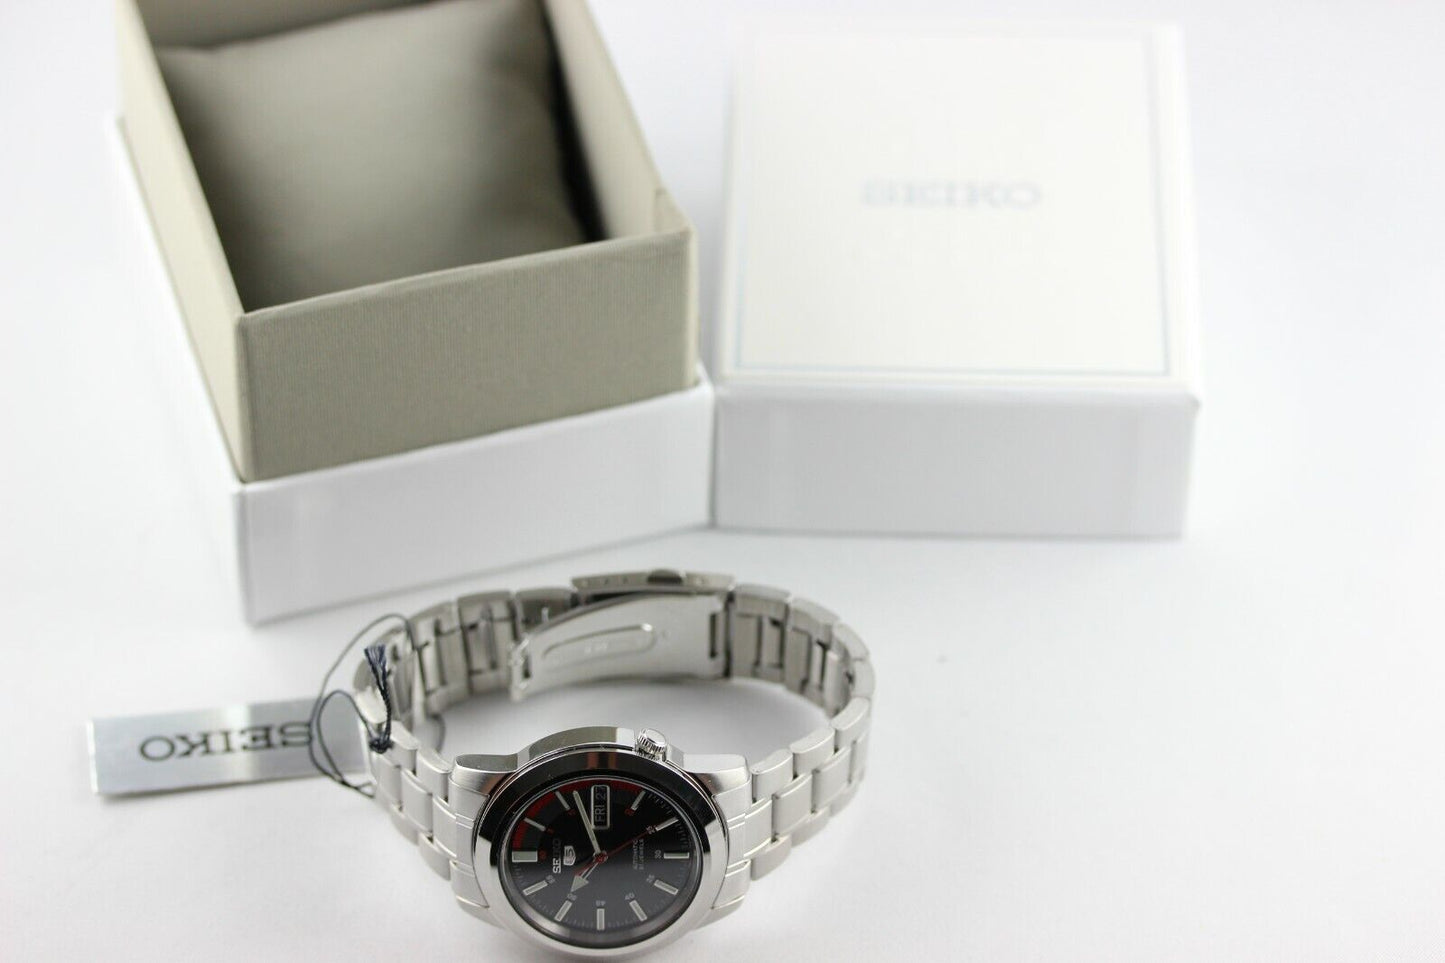 Seiko 5 Automatic 21 Jewels Racing Dial Men's Watch